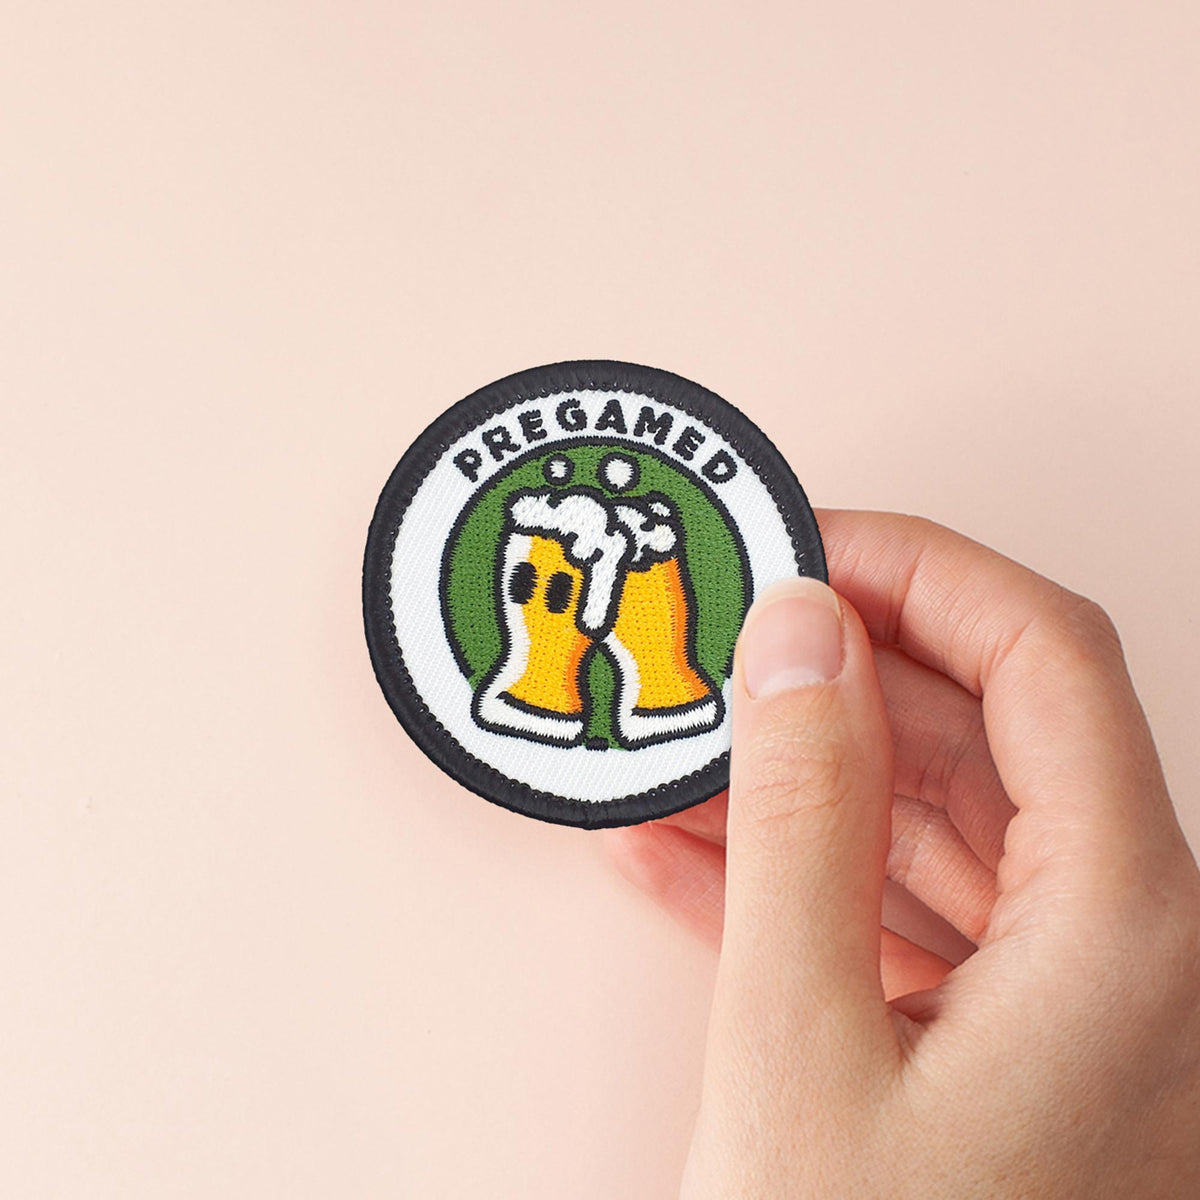 Pregamed Drinking Beer Cheers individual adulting merit badge patch for adults